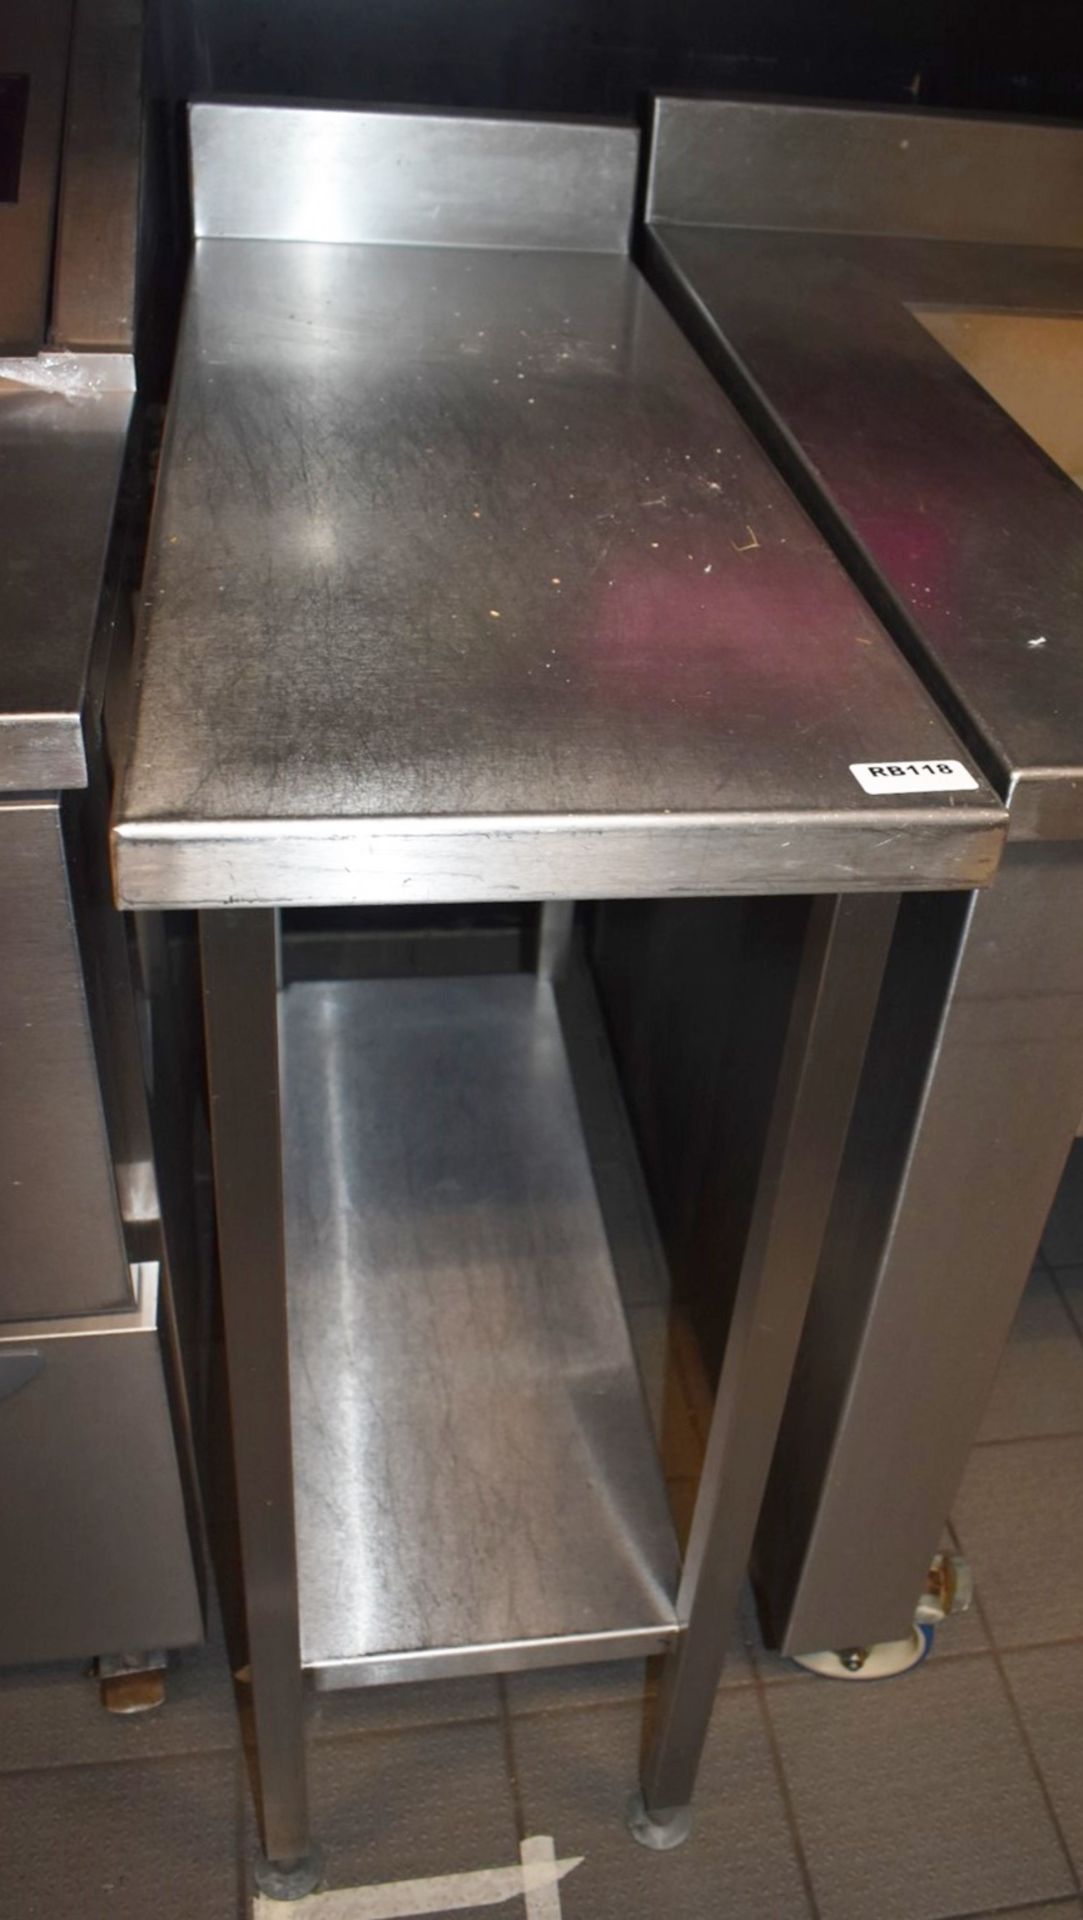 1 x Stainless Steel Fill In Prep Table - Size H90 x W35 x D90 cms - Ref: RB118 - CL558 - Location: